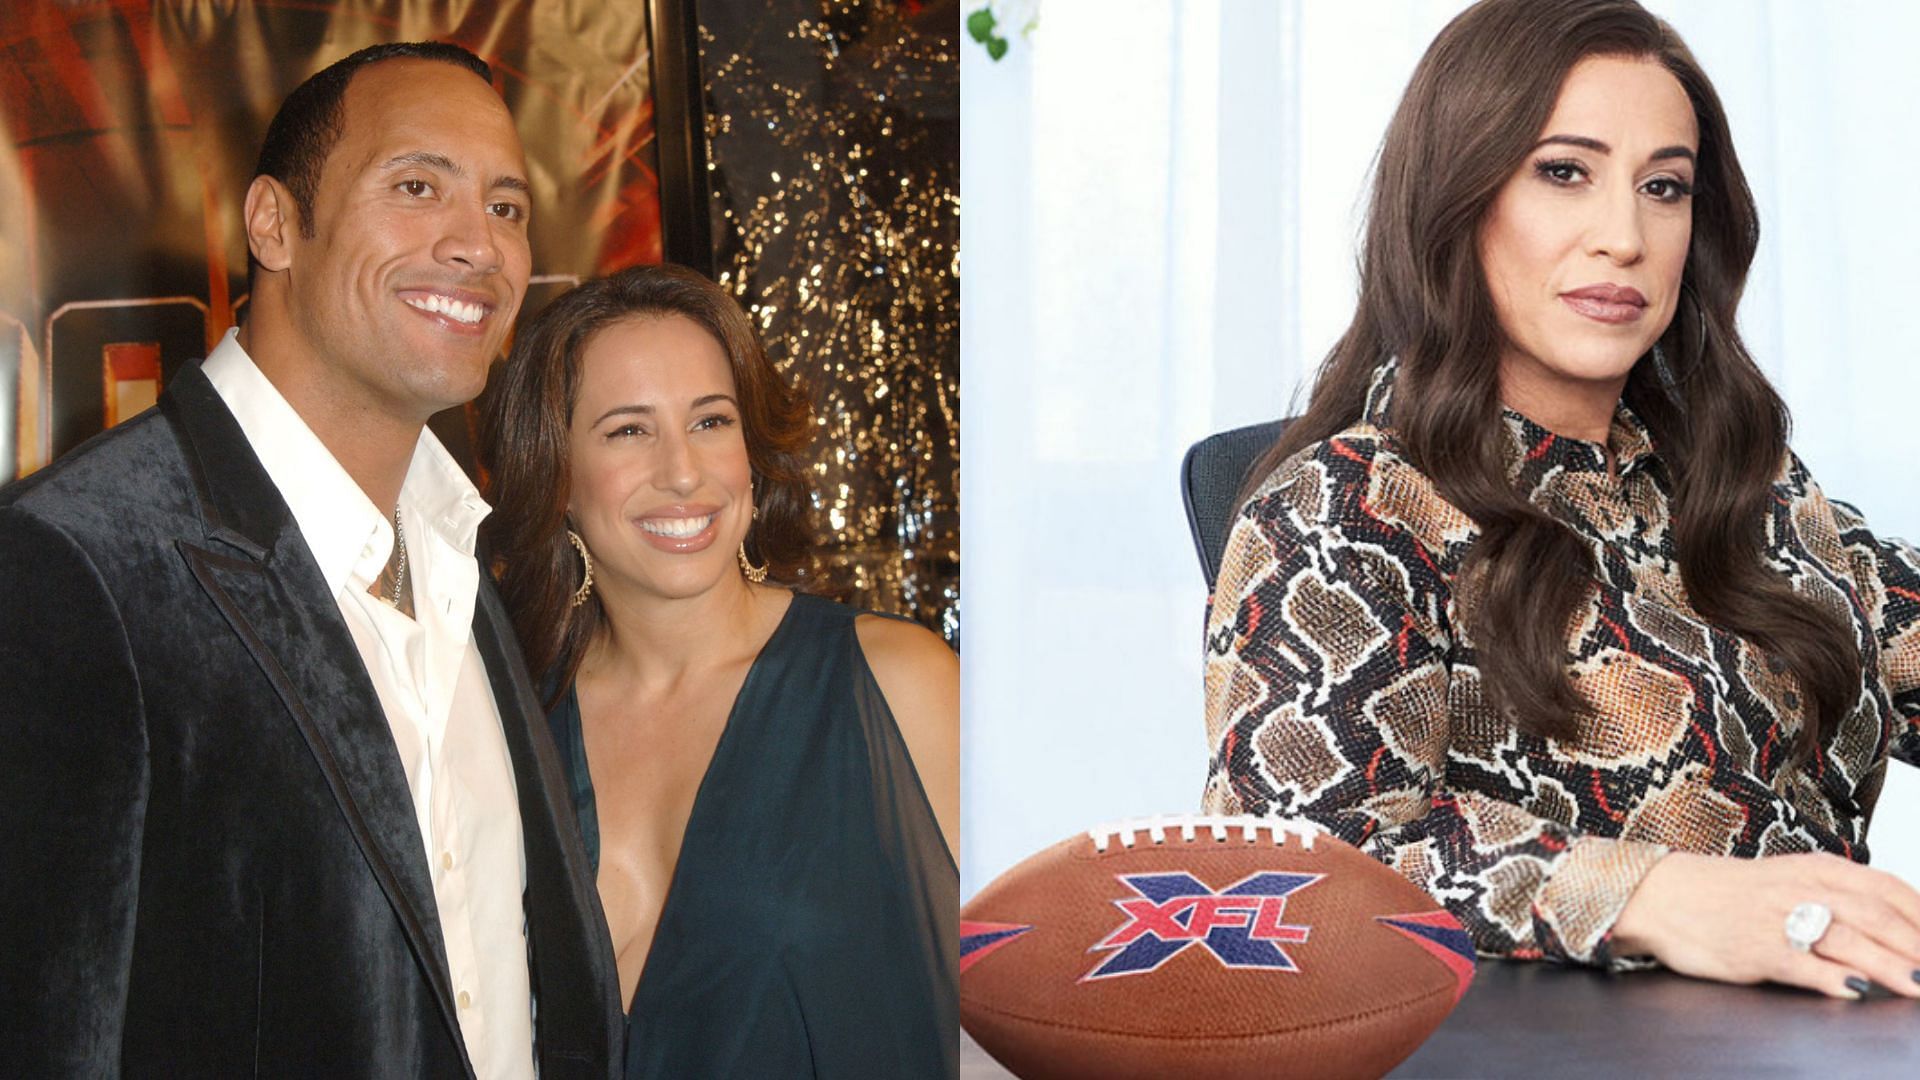 Dwayne Johnson and Dany Garcia finalized their divorce in 2008